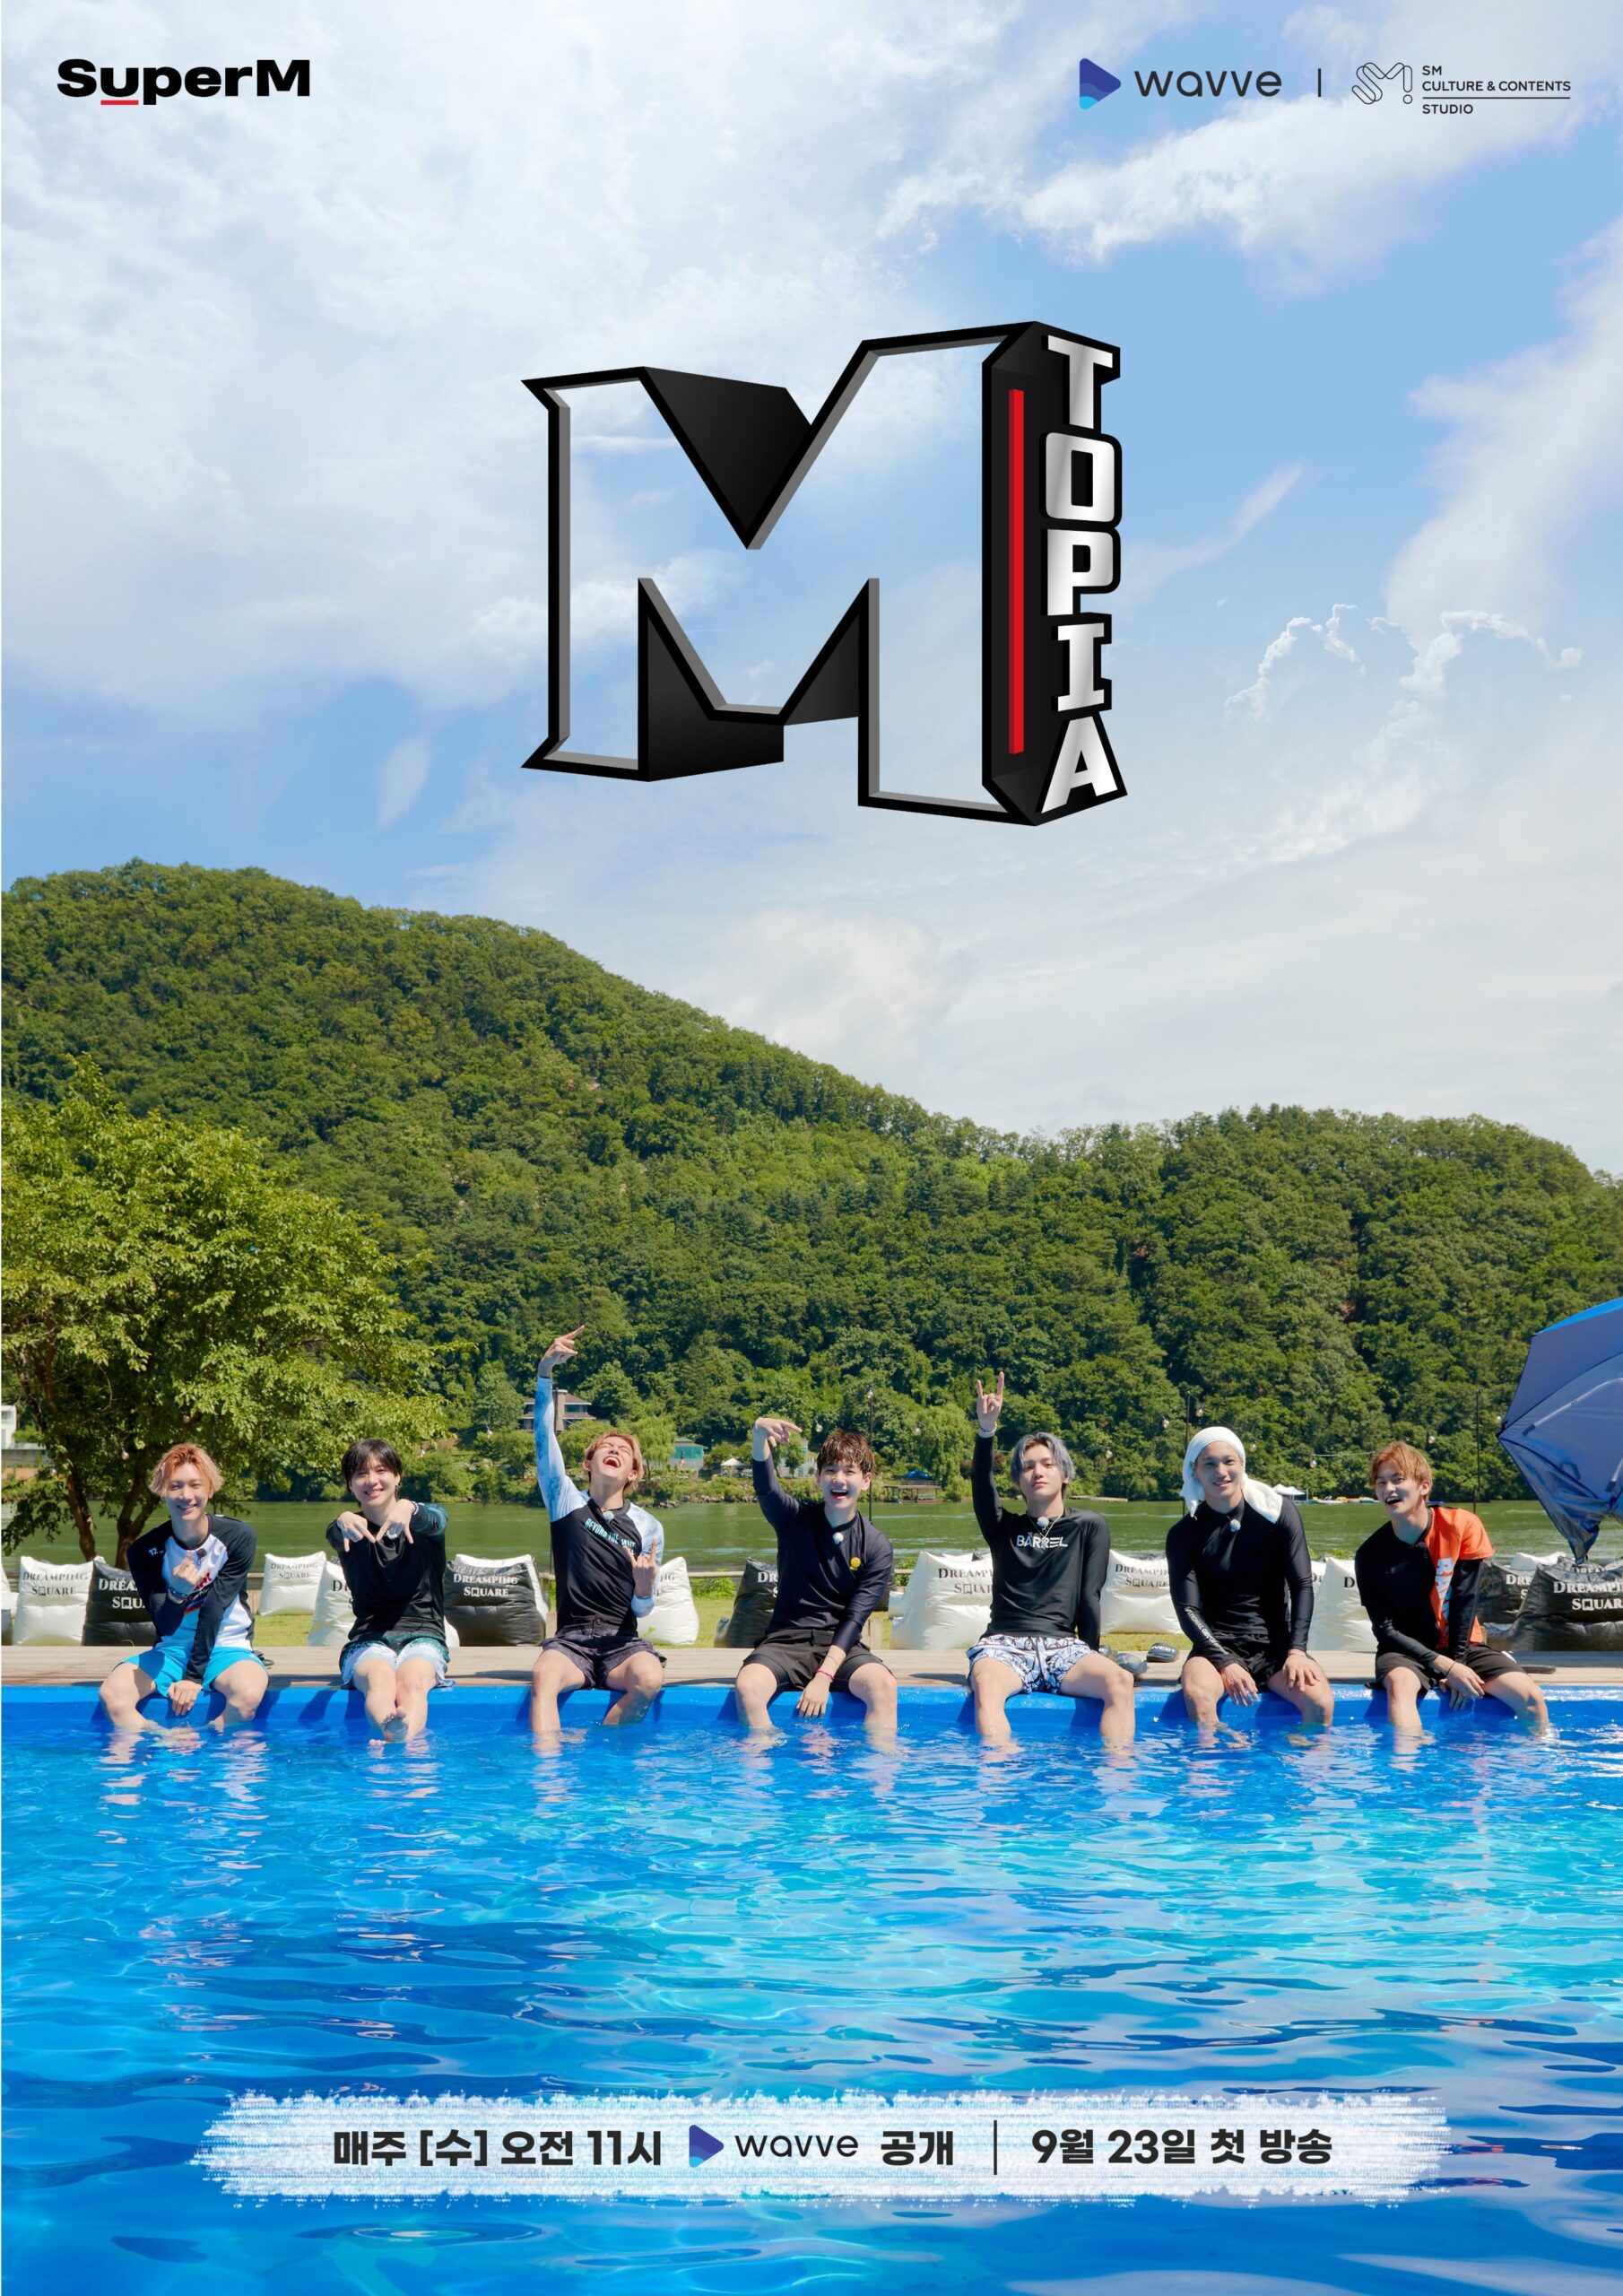 superm-poster-upcoming-reality-show-1